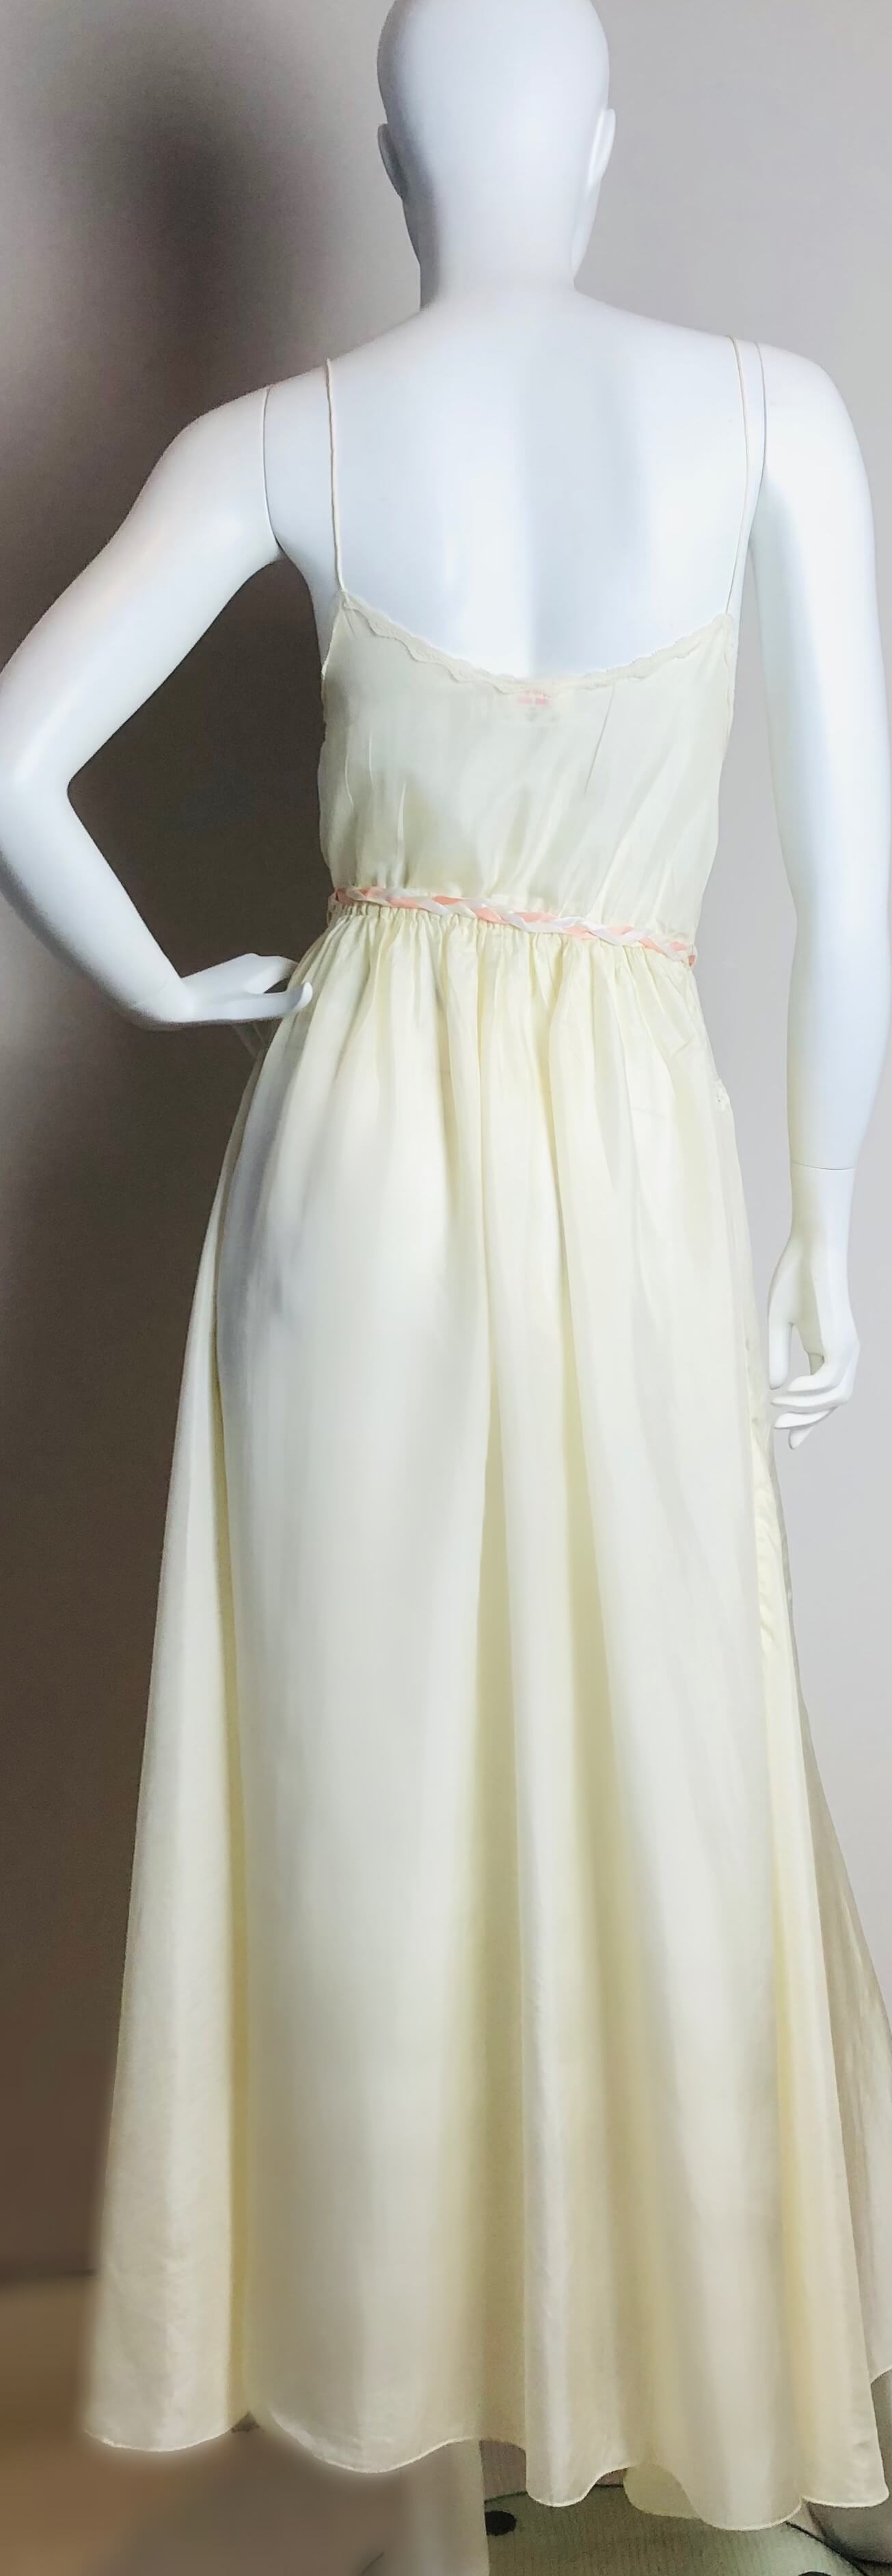 Ivory slip dress and gown